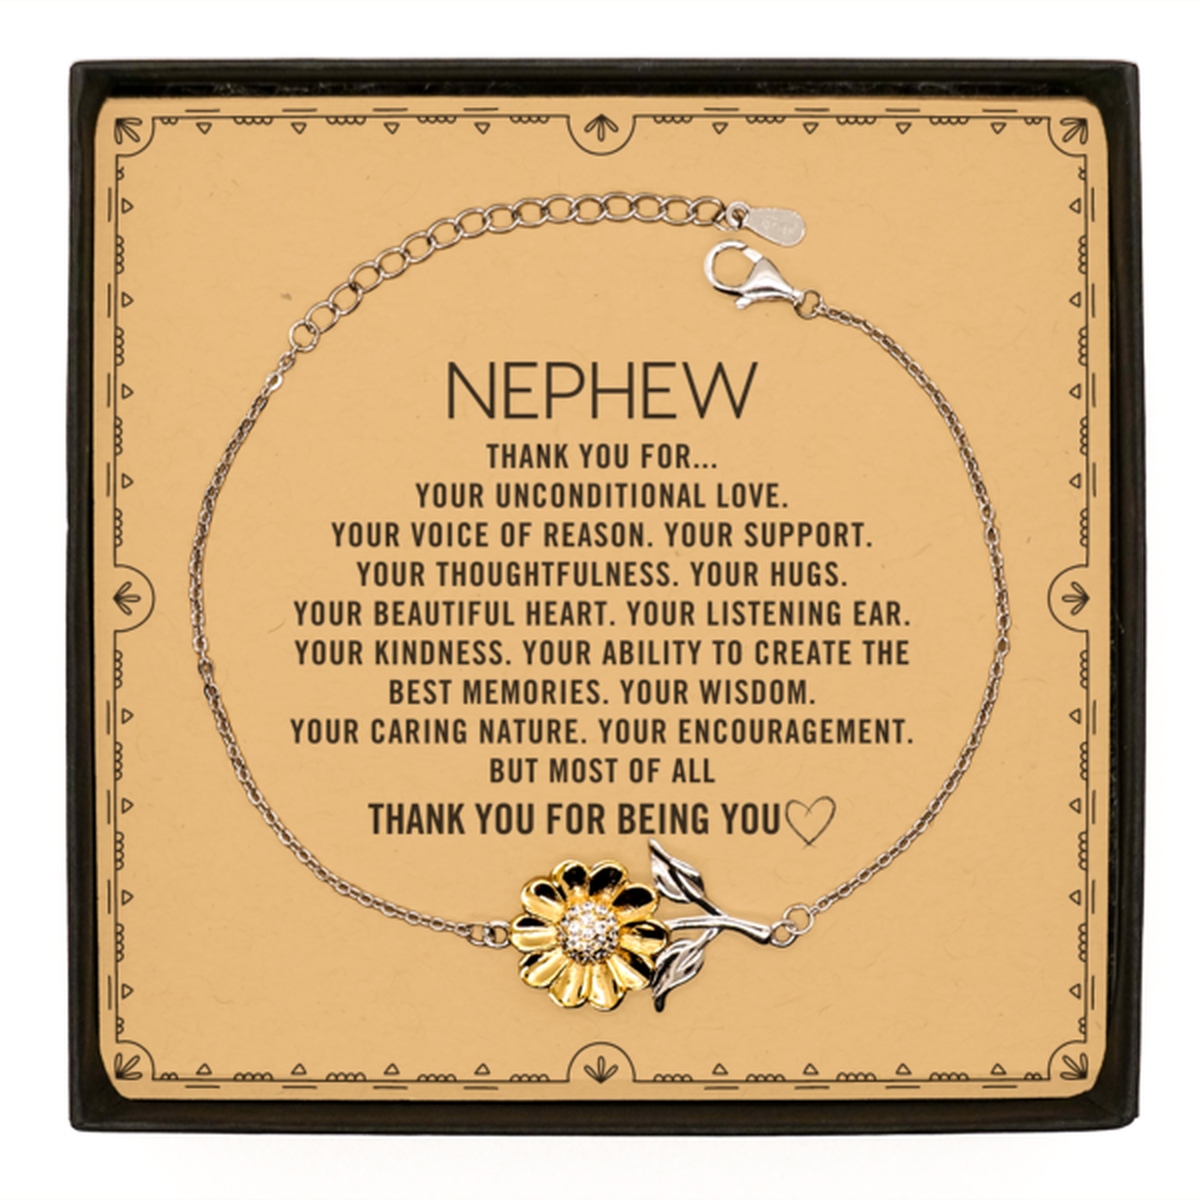 Nephew Sunflower Bracelet Custom, Message Card Gifts For Nephew Christmas Graduation Birthday Gifts for Men Women Nephew Thank you for Your unconditional love